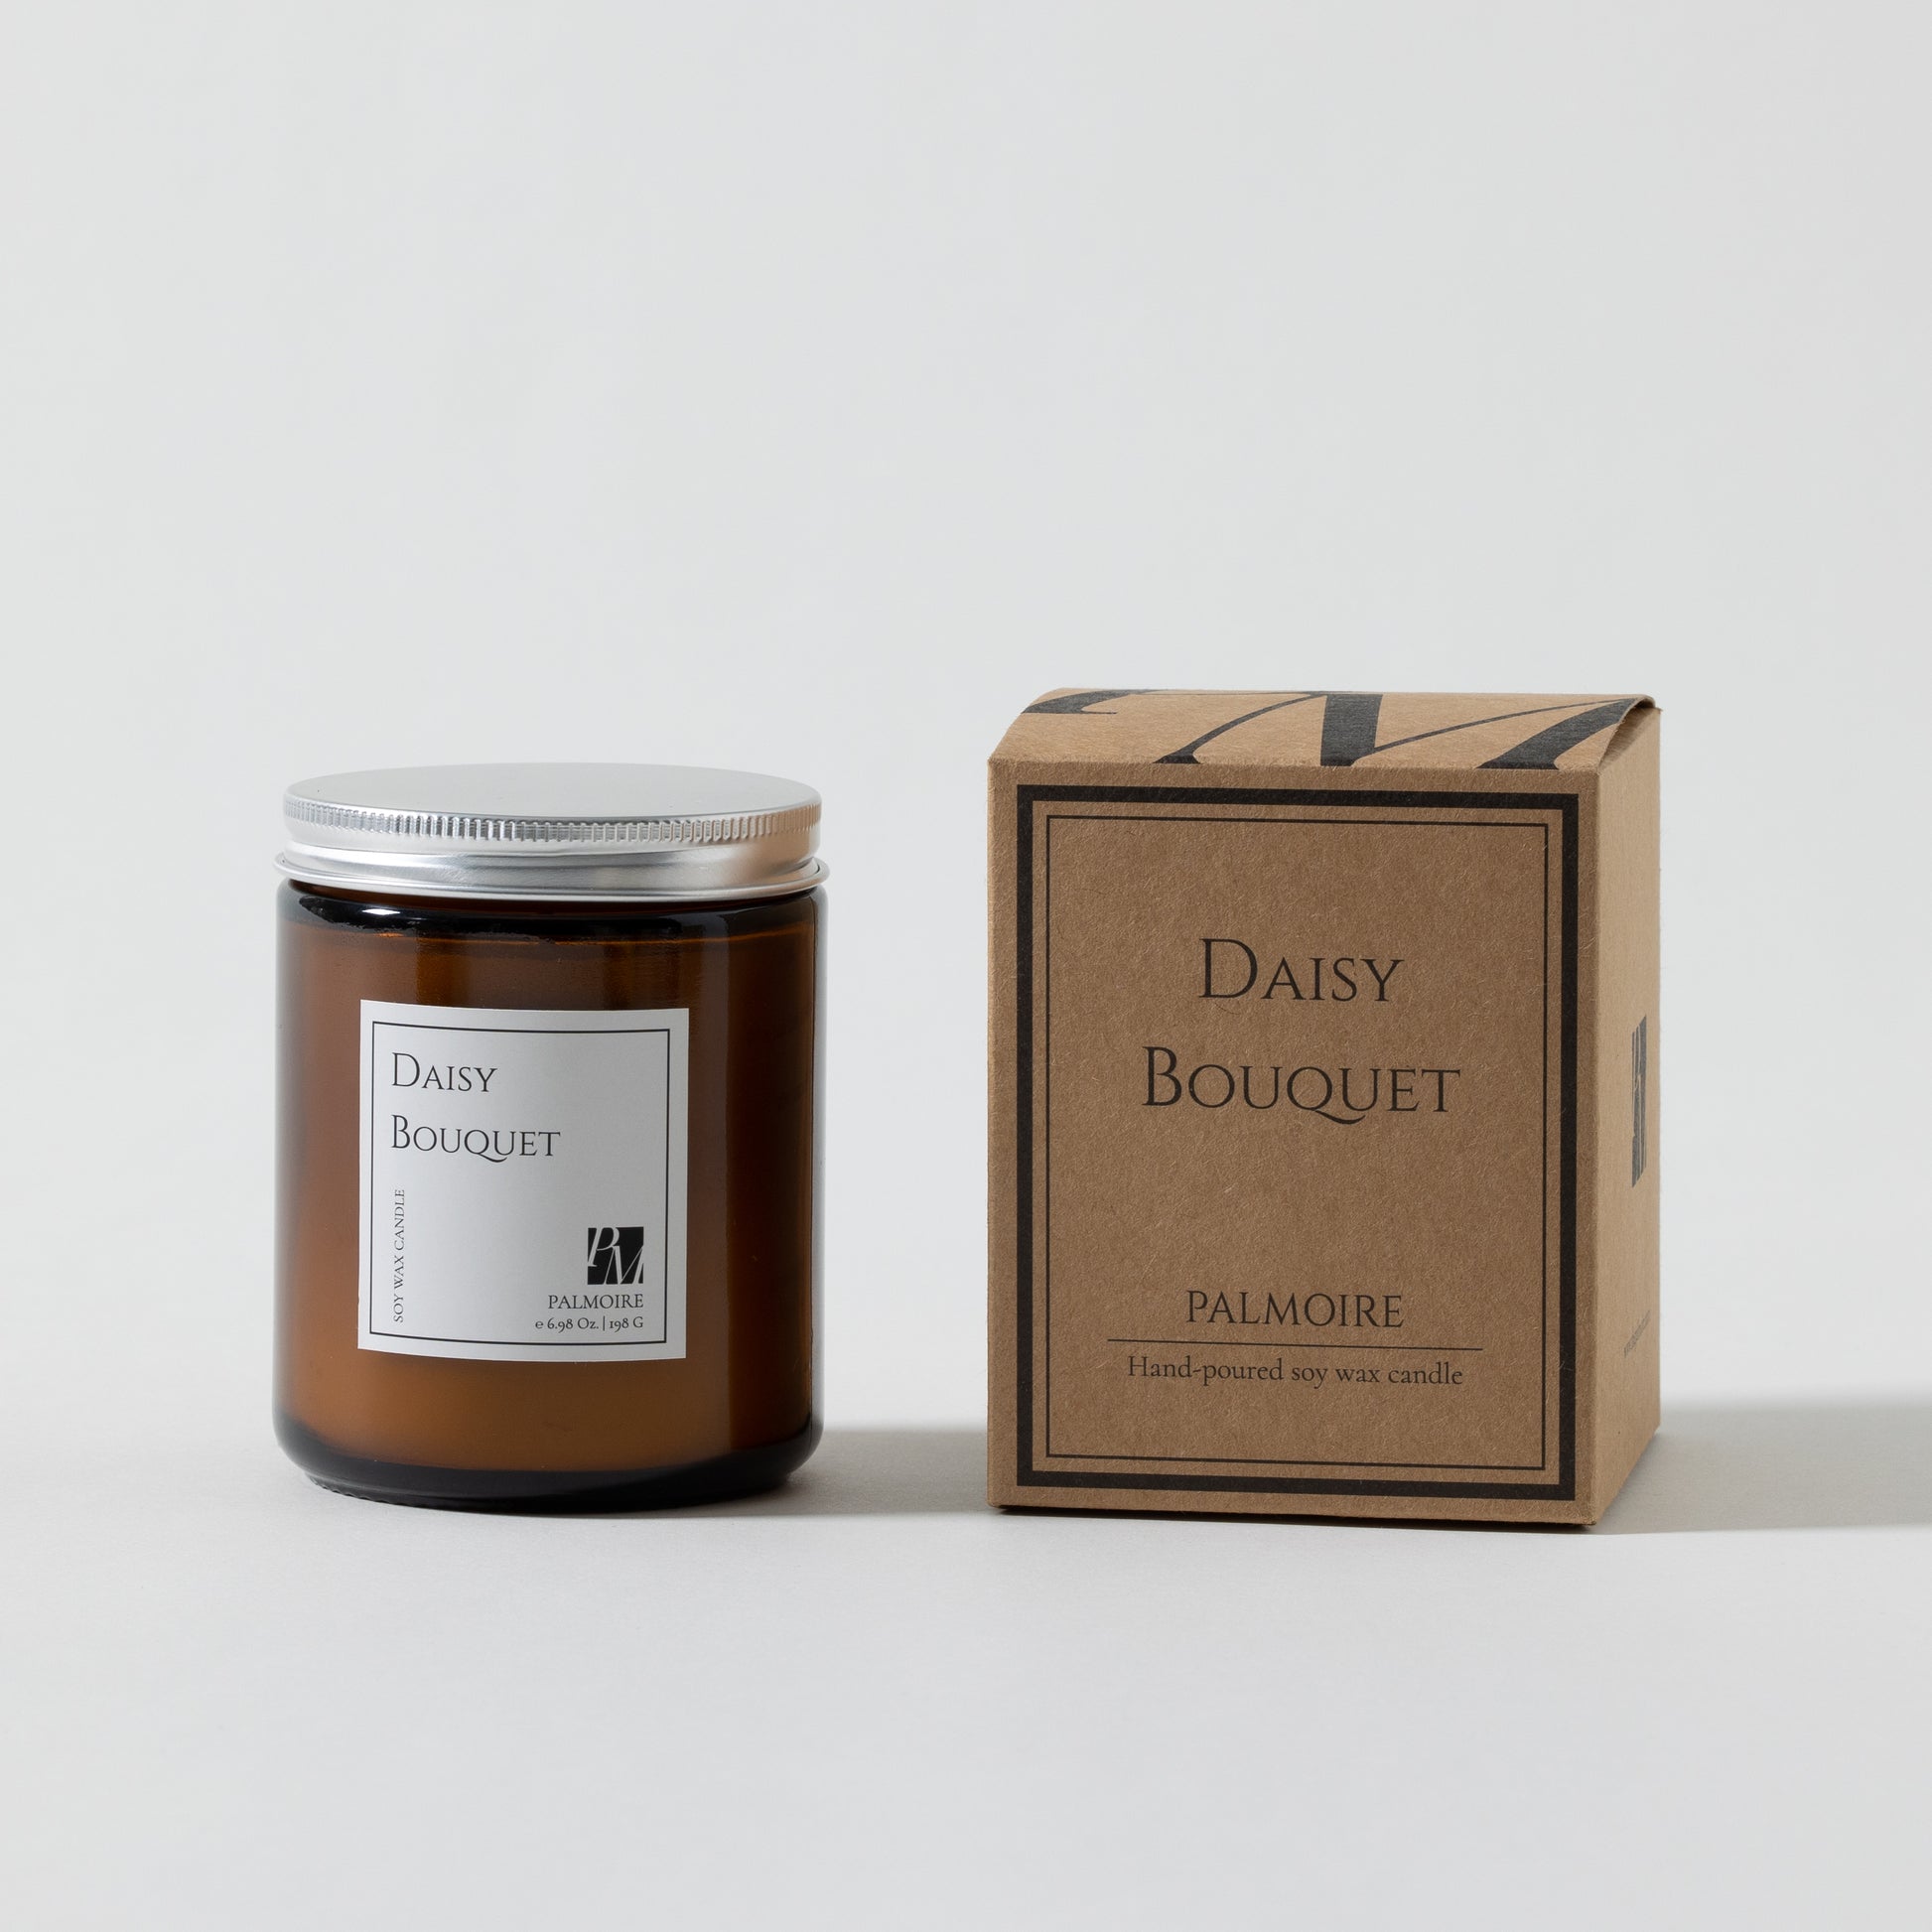 Daisy Bouquet Soy Wax Candle - PALMOIRE